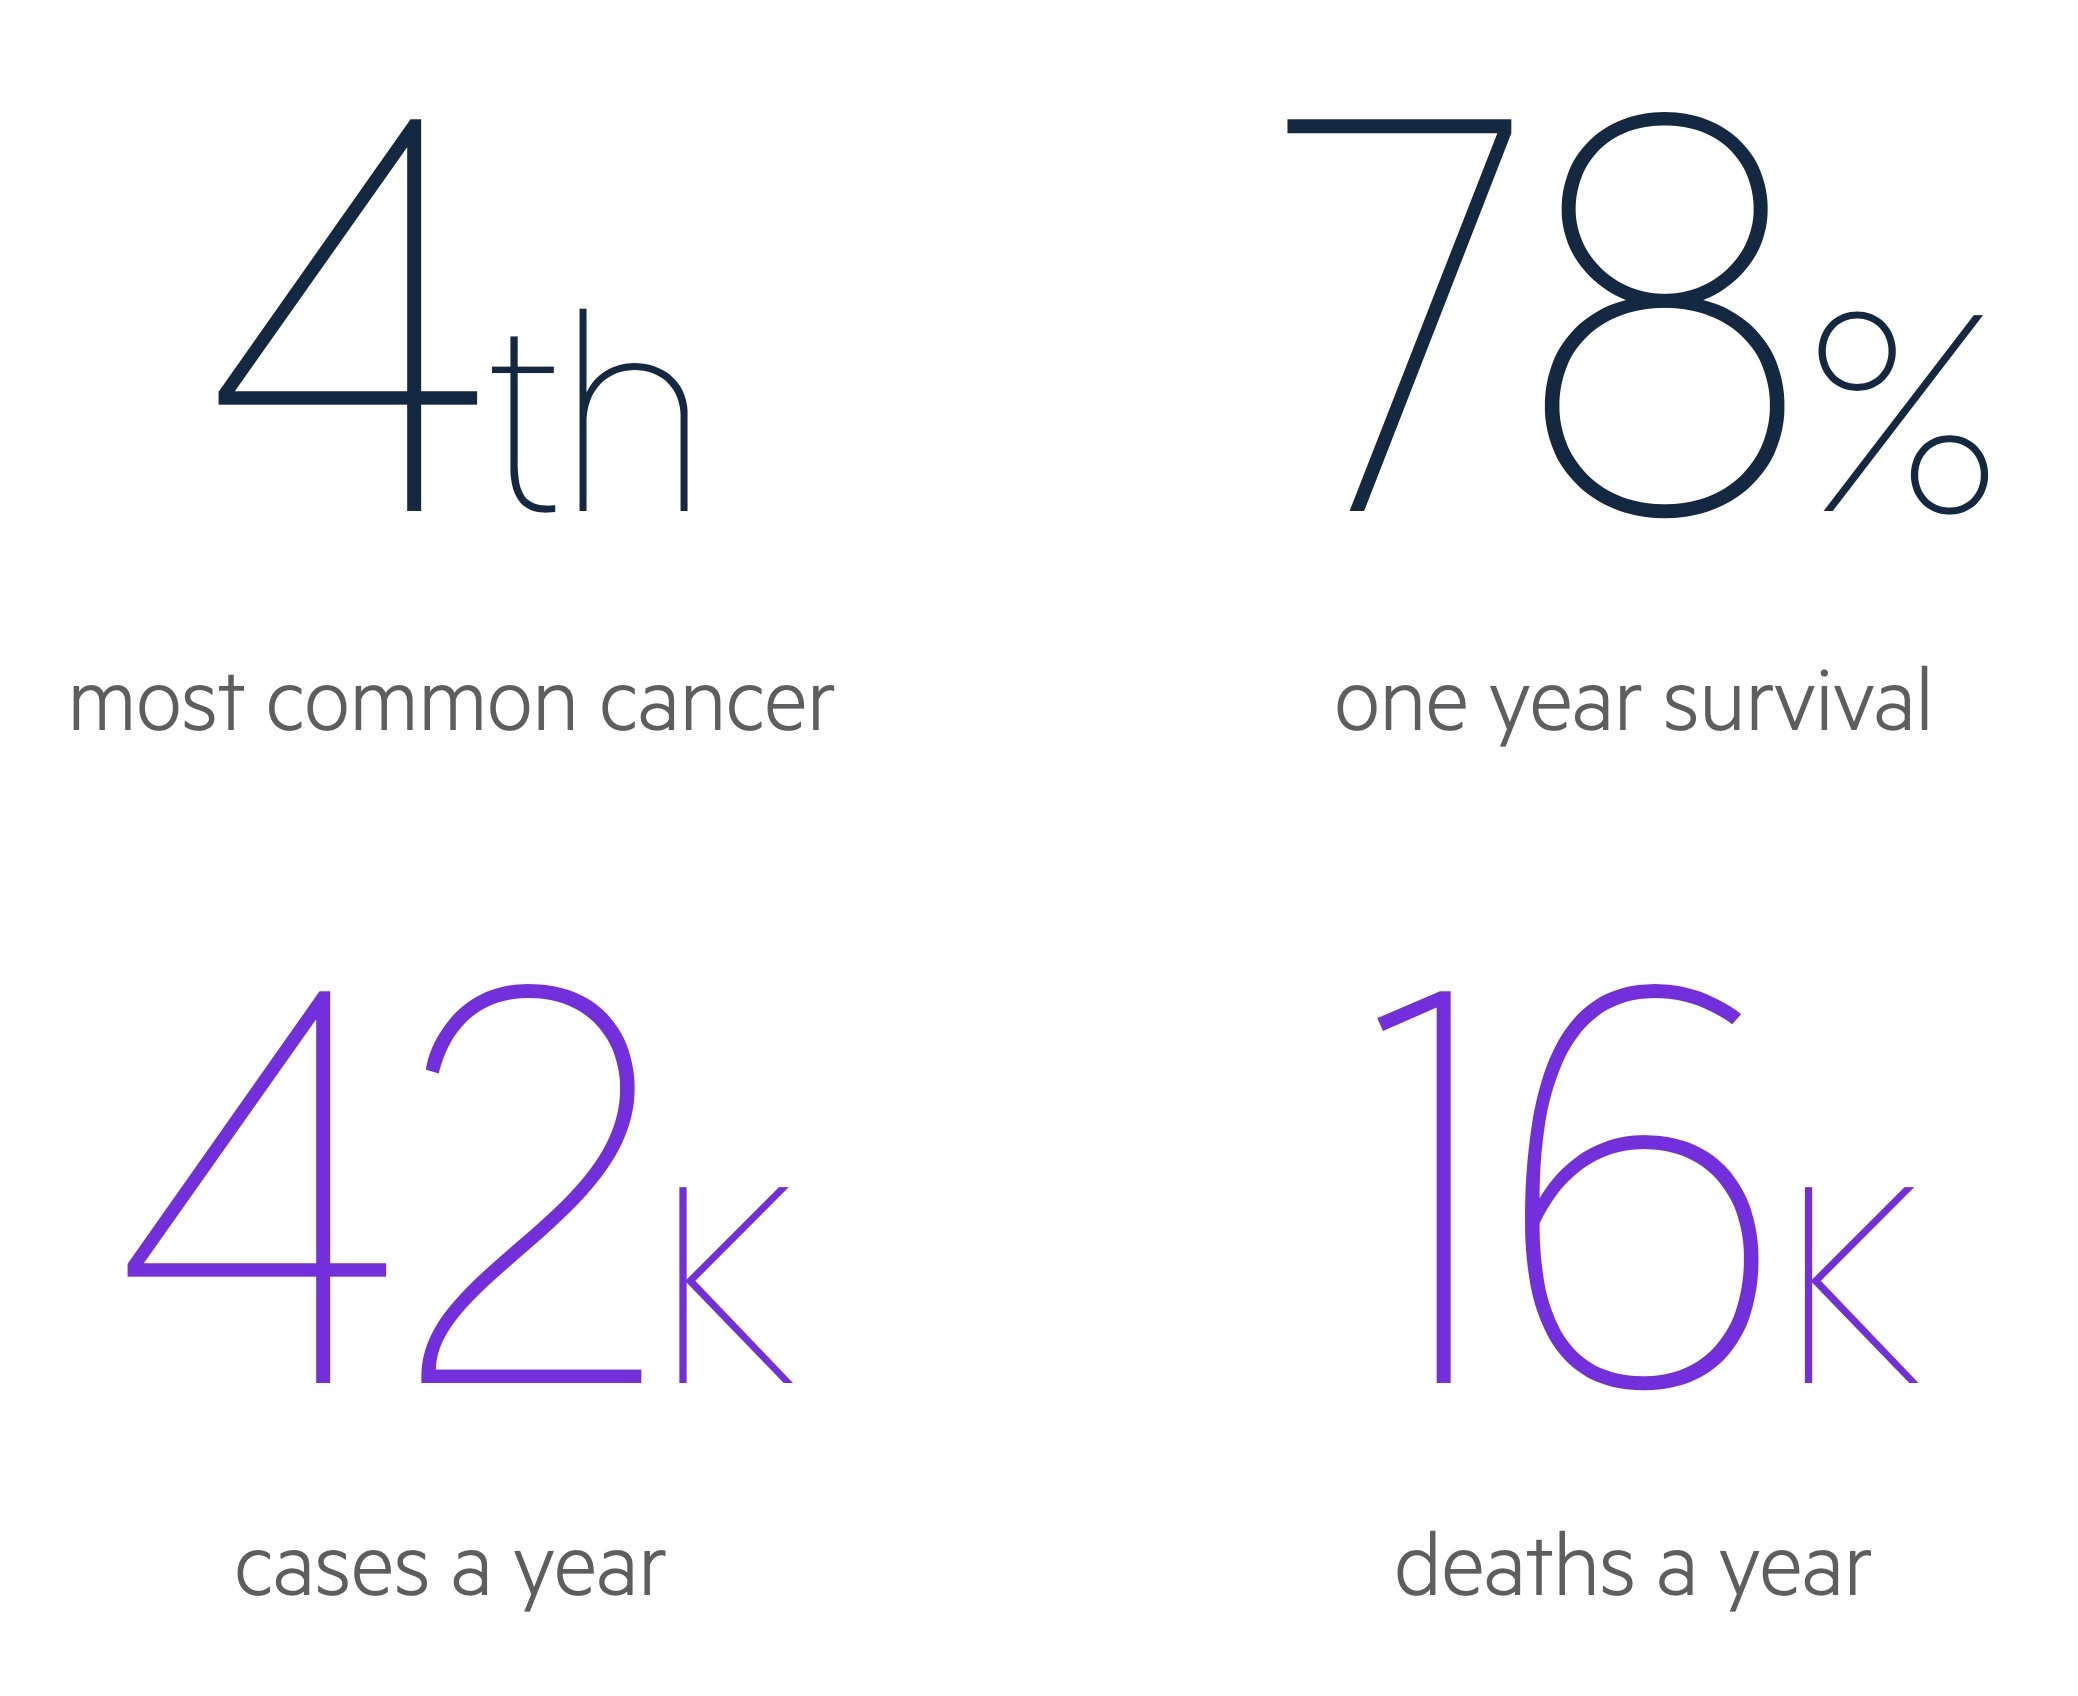 Colorectal cancer facts and figures